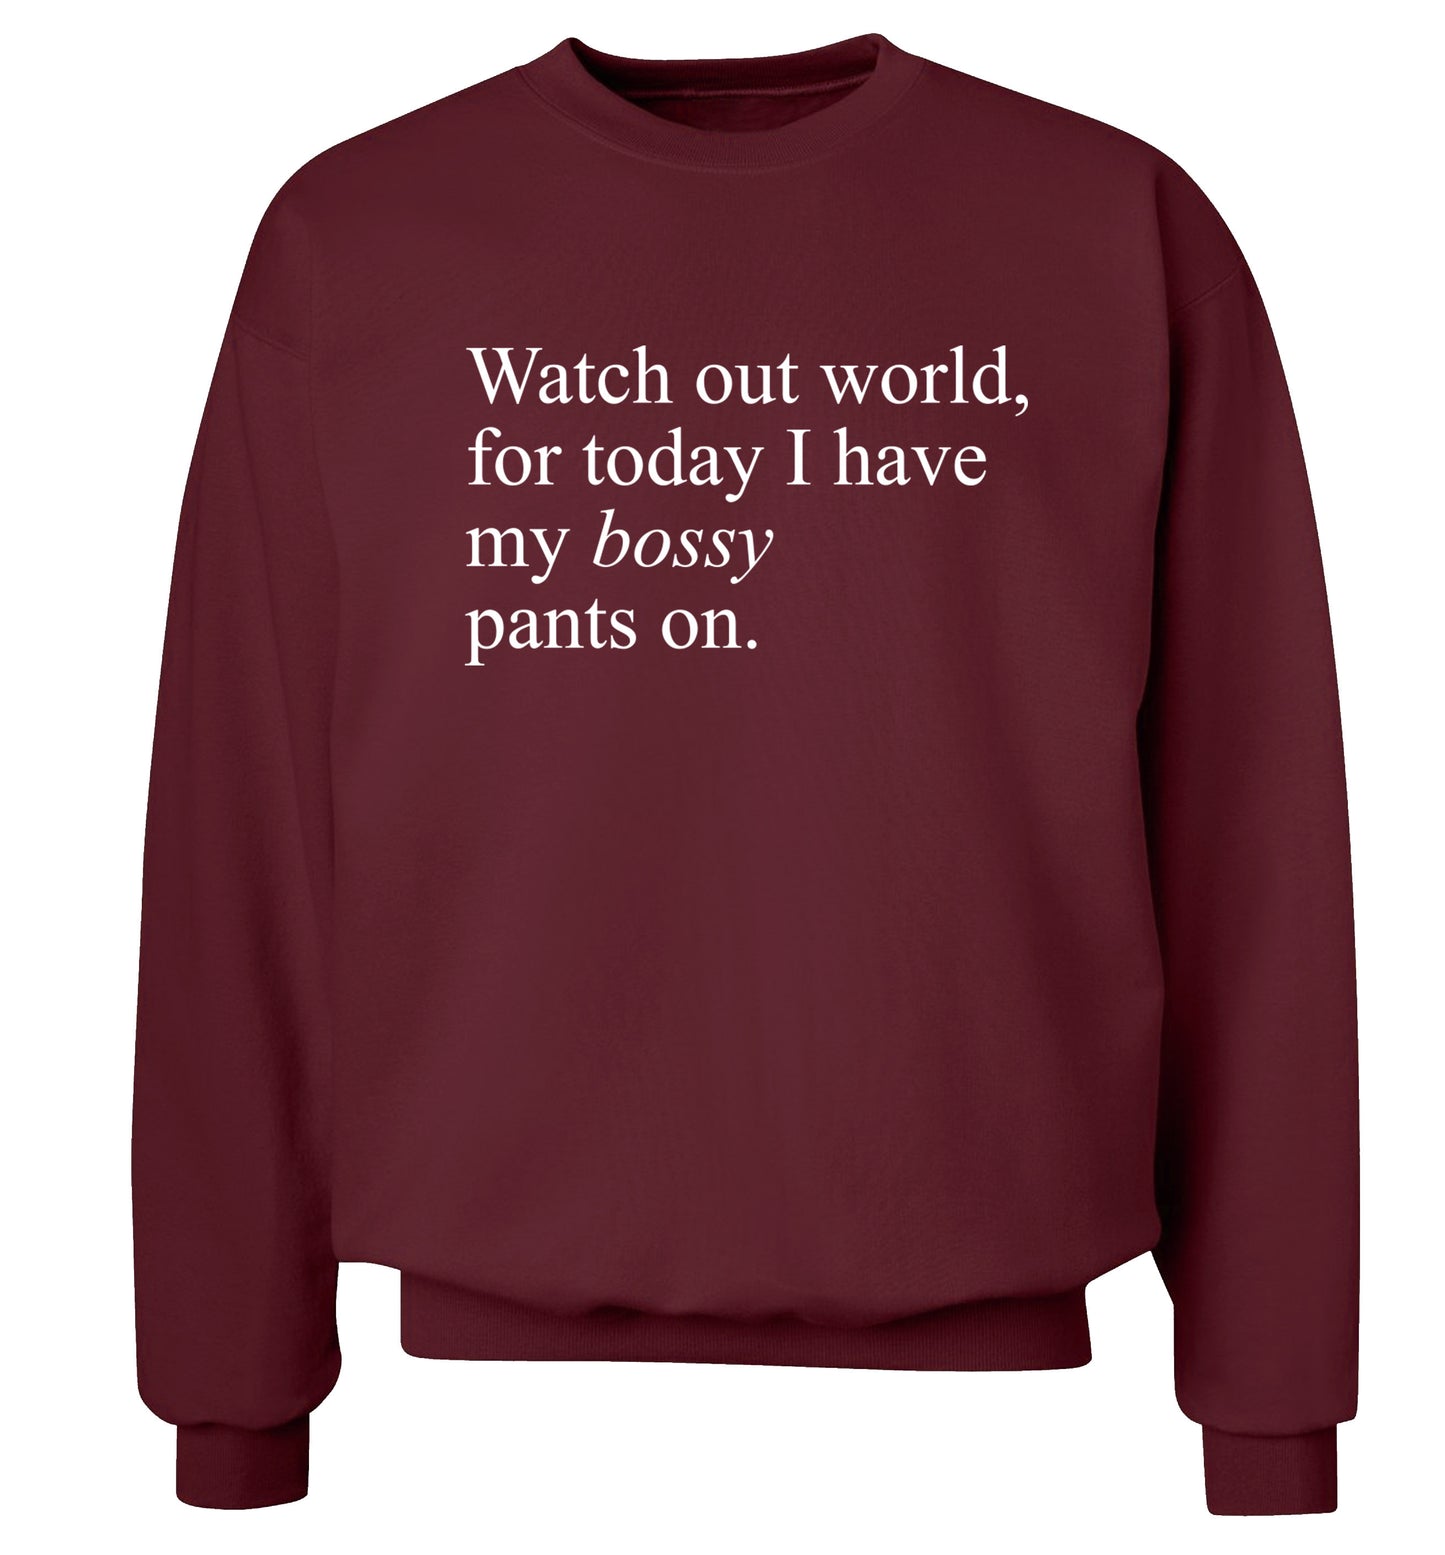 Watch out world, for today I have my bossy pants on Adult's unisex maroon Sweater 2XL